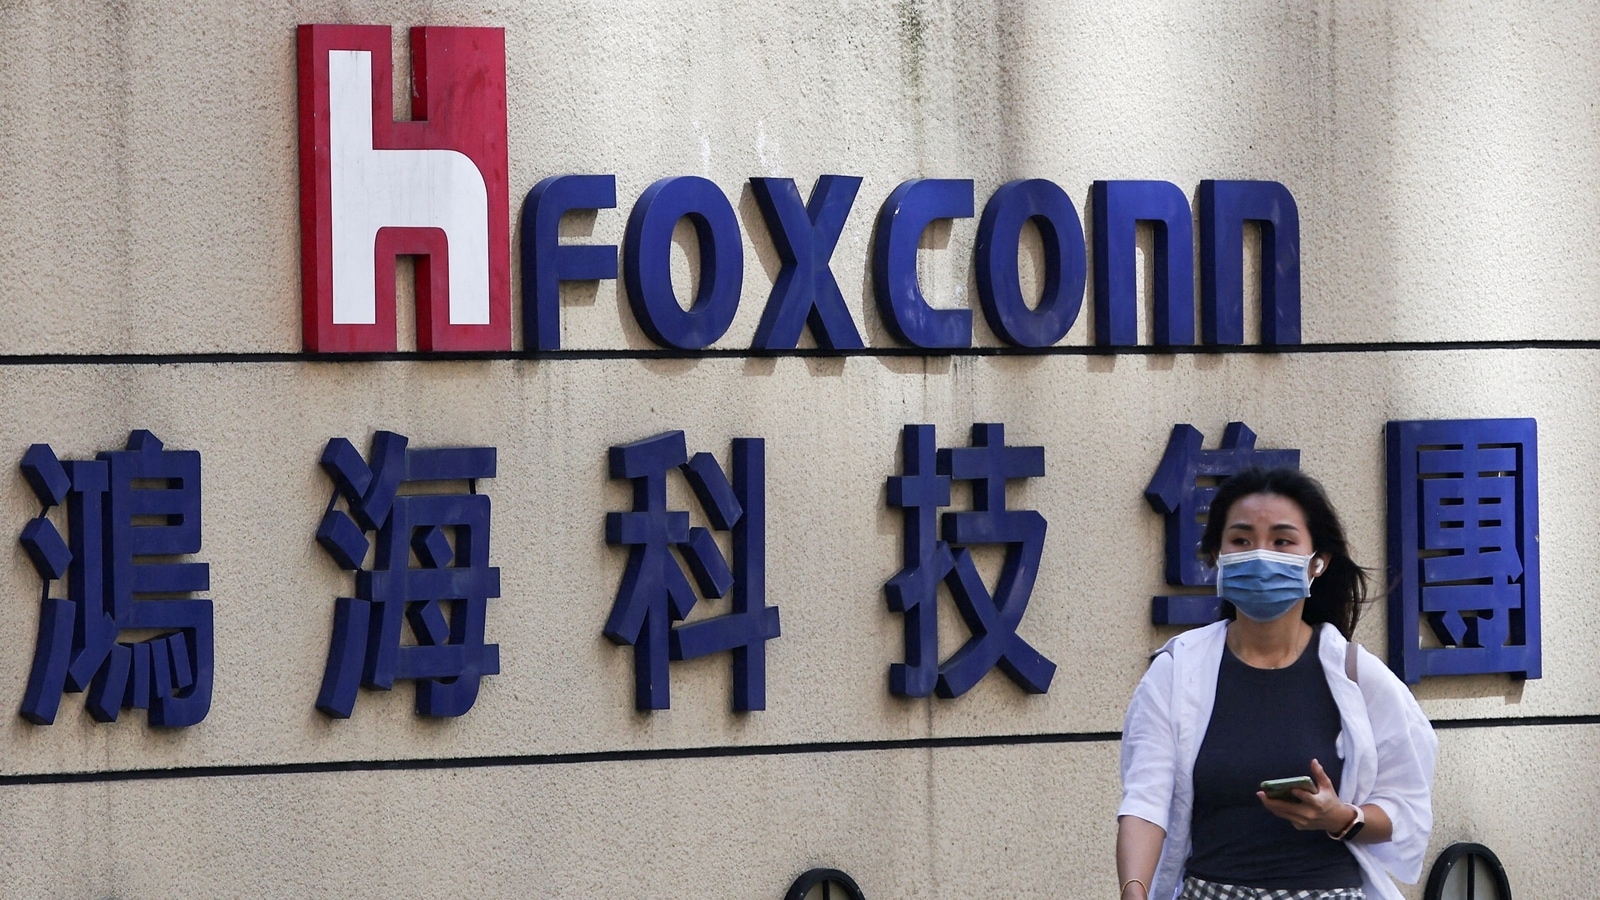 iPhone maker Foxconn’s sales decline as China begins probe